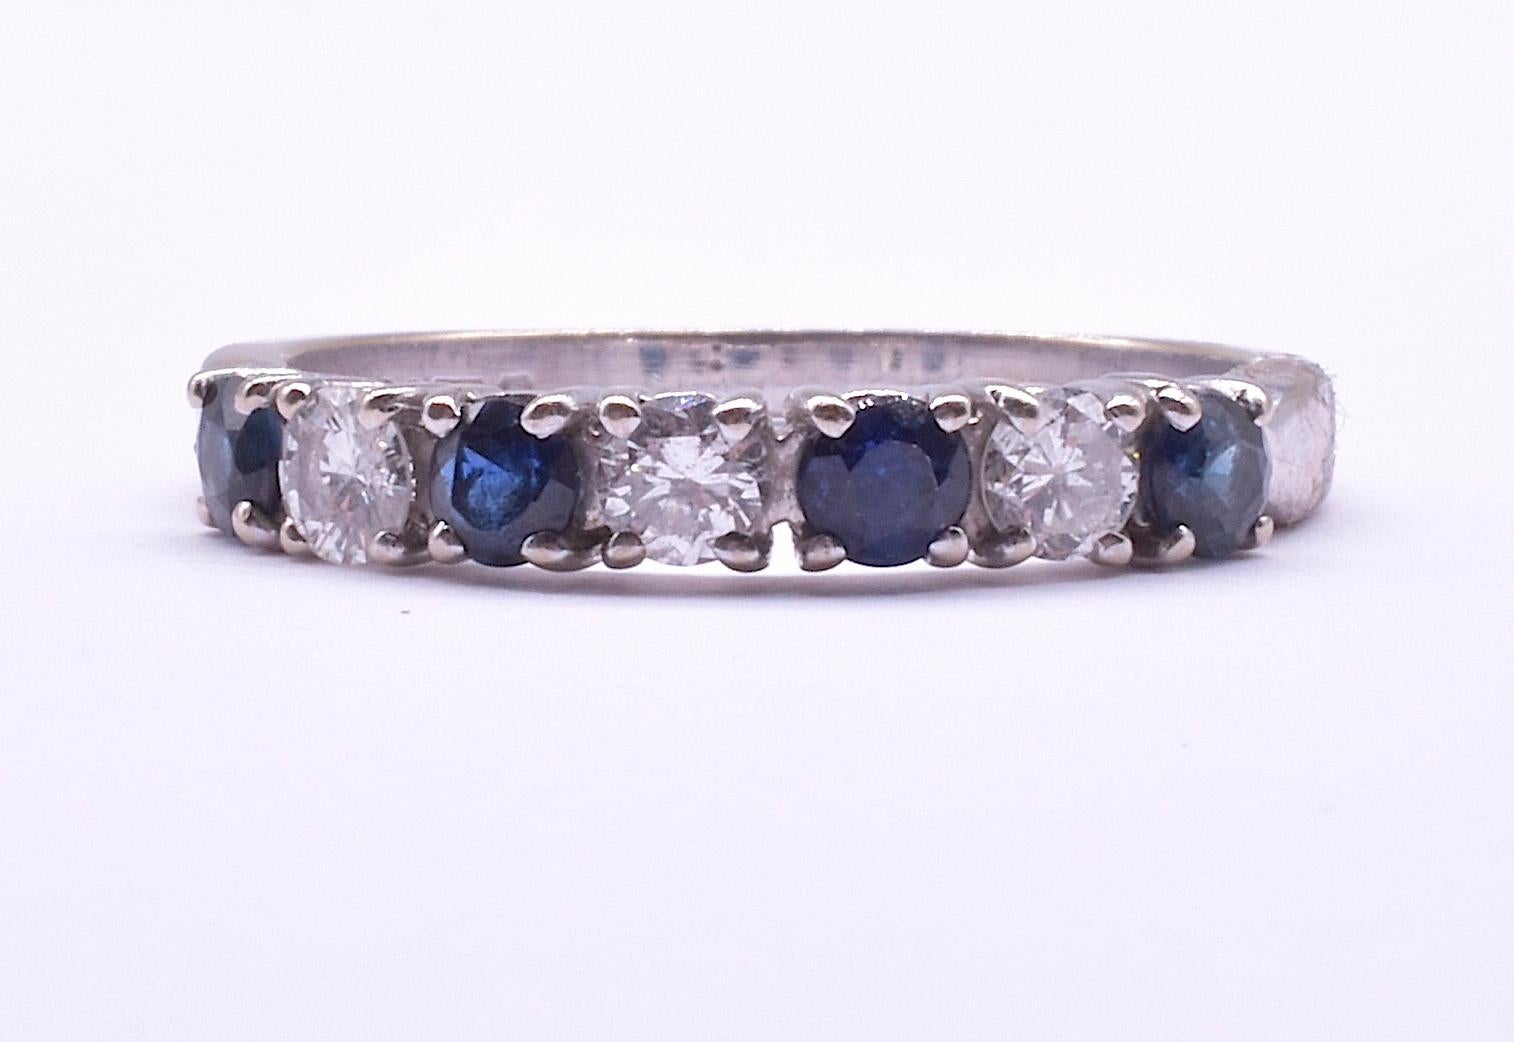 Our vintage 1/2 hoop 7 stone ring is hallmarked 18K London for the year 1975. With 4 sapphires and 3 diamonds it is the perfect ring to pair with other bands. Approximately 4 mm in width, the ring has a somewhat modern geometric look with round